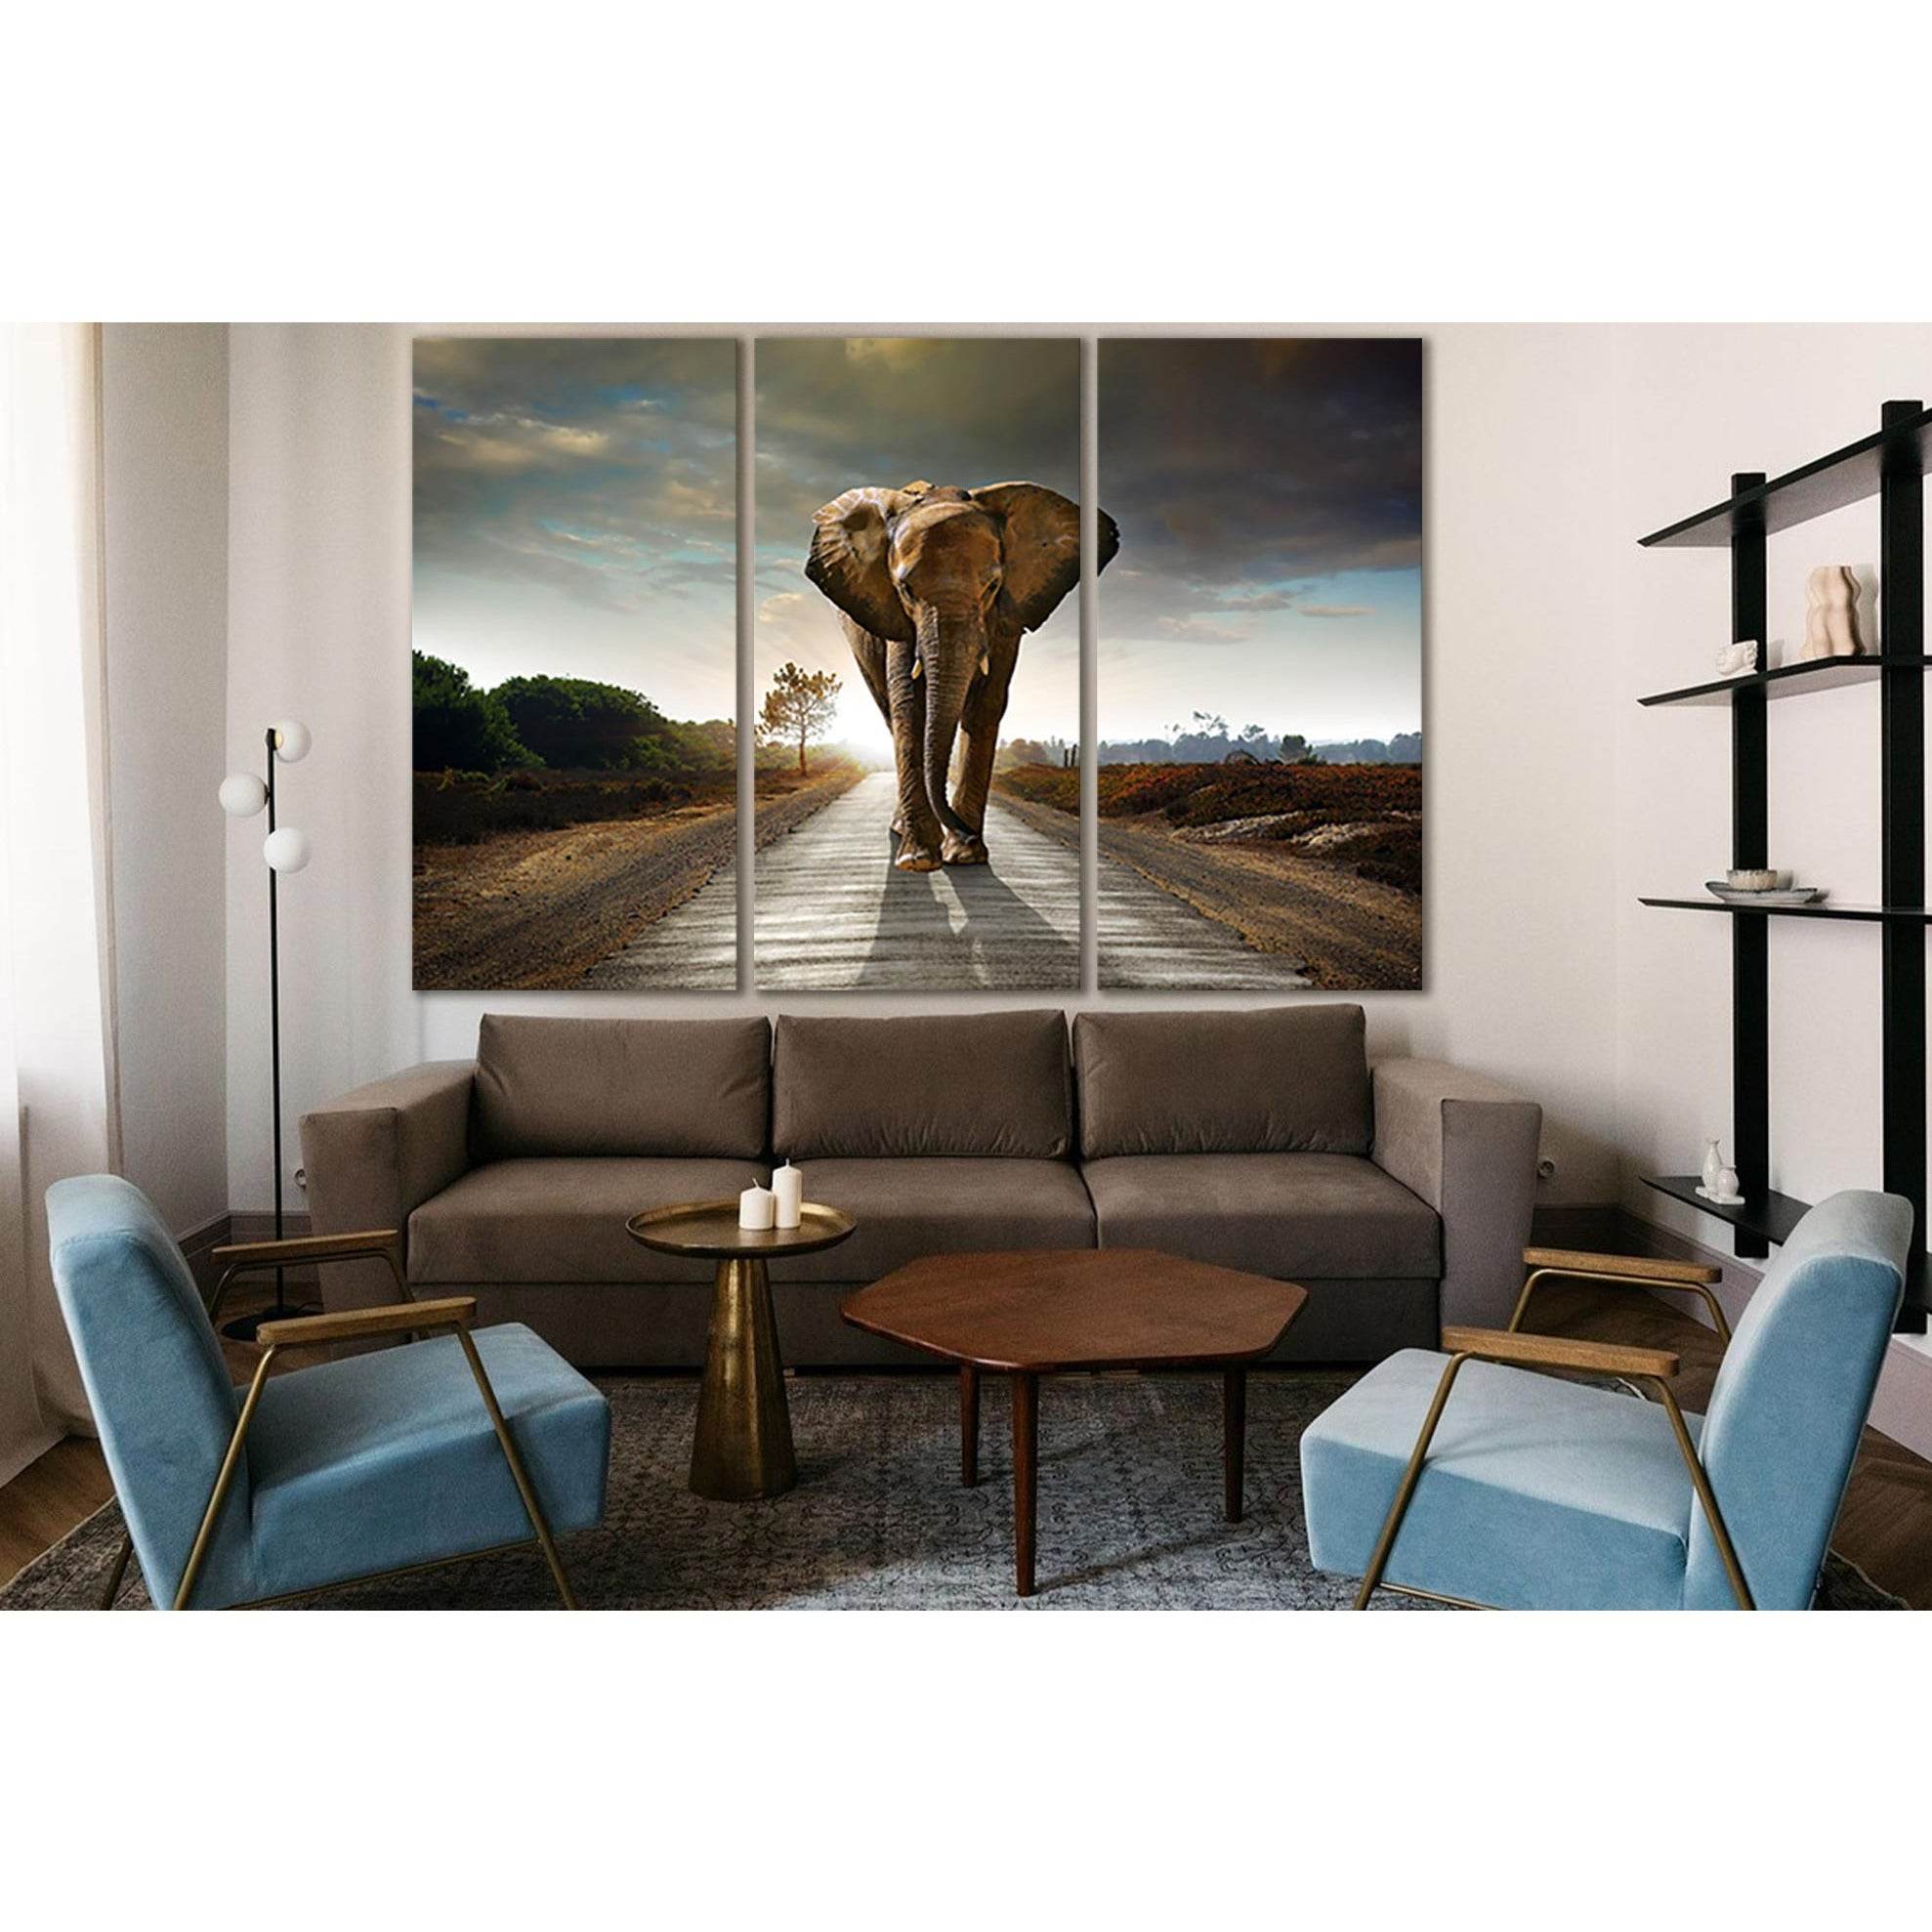 Elephant On The Road №SL1555 Ready to Hang Canvas Print